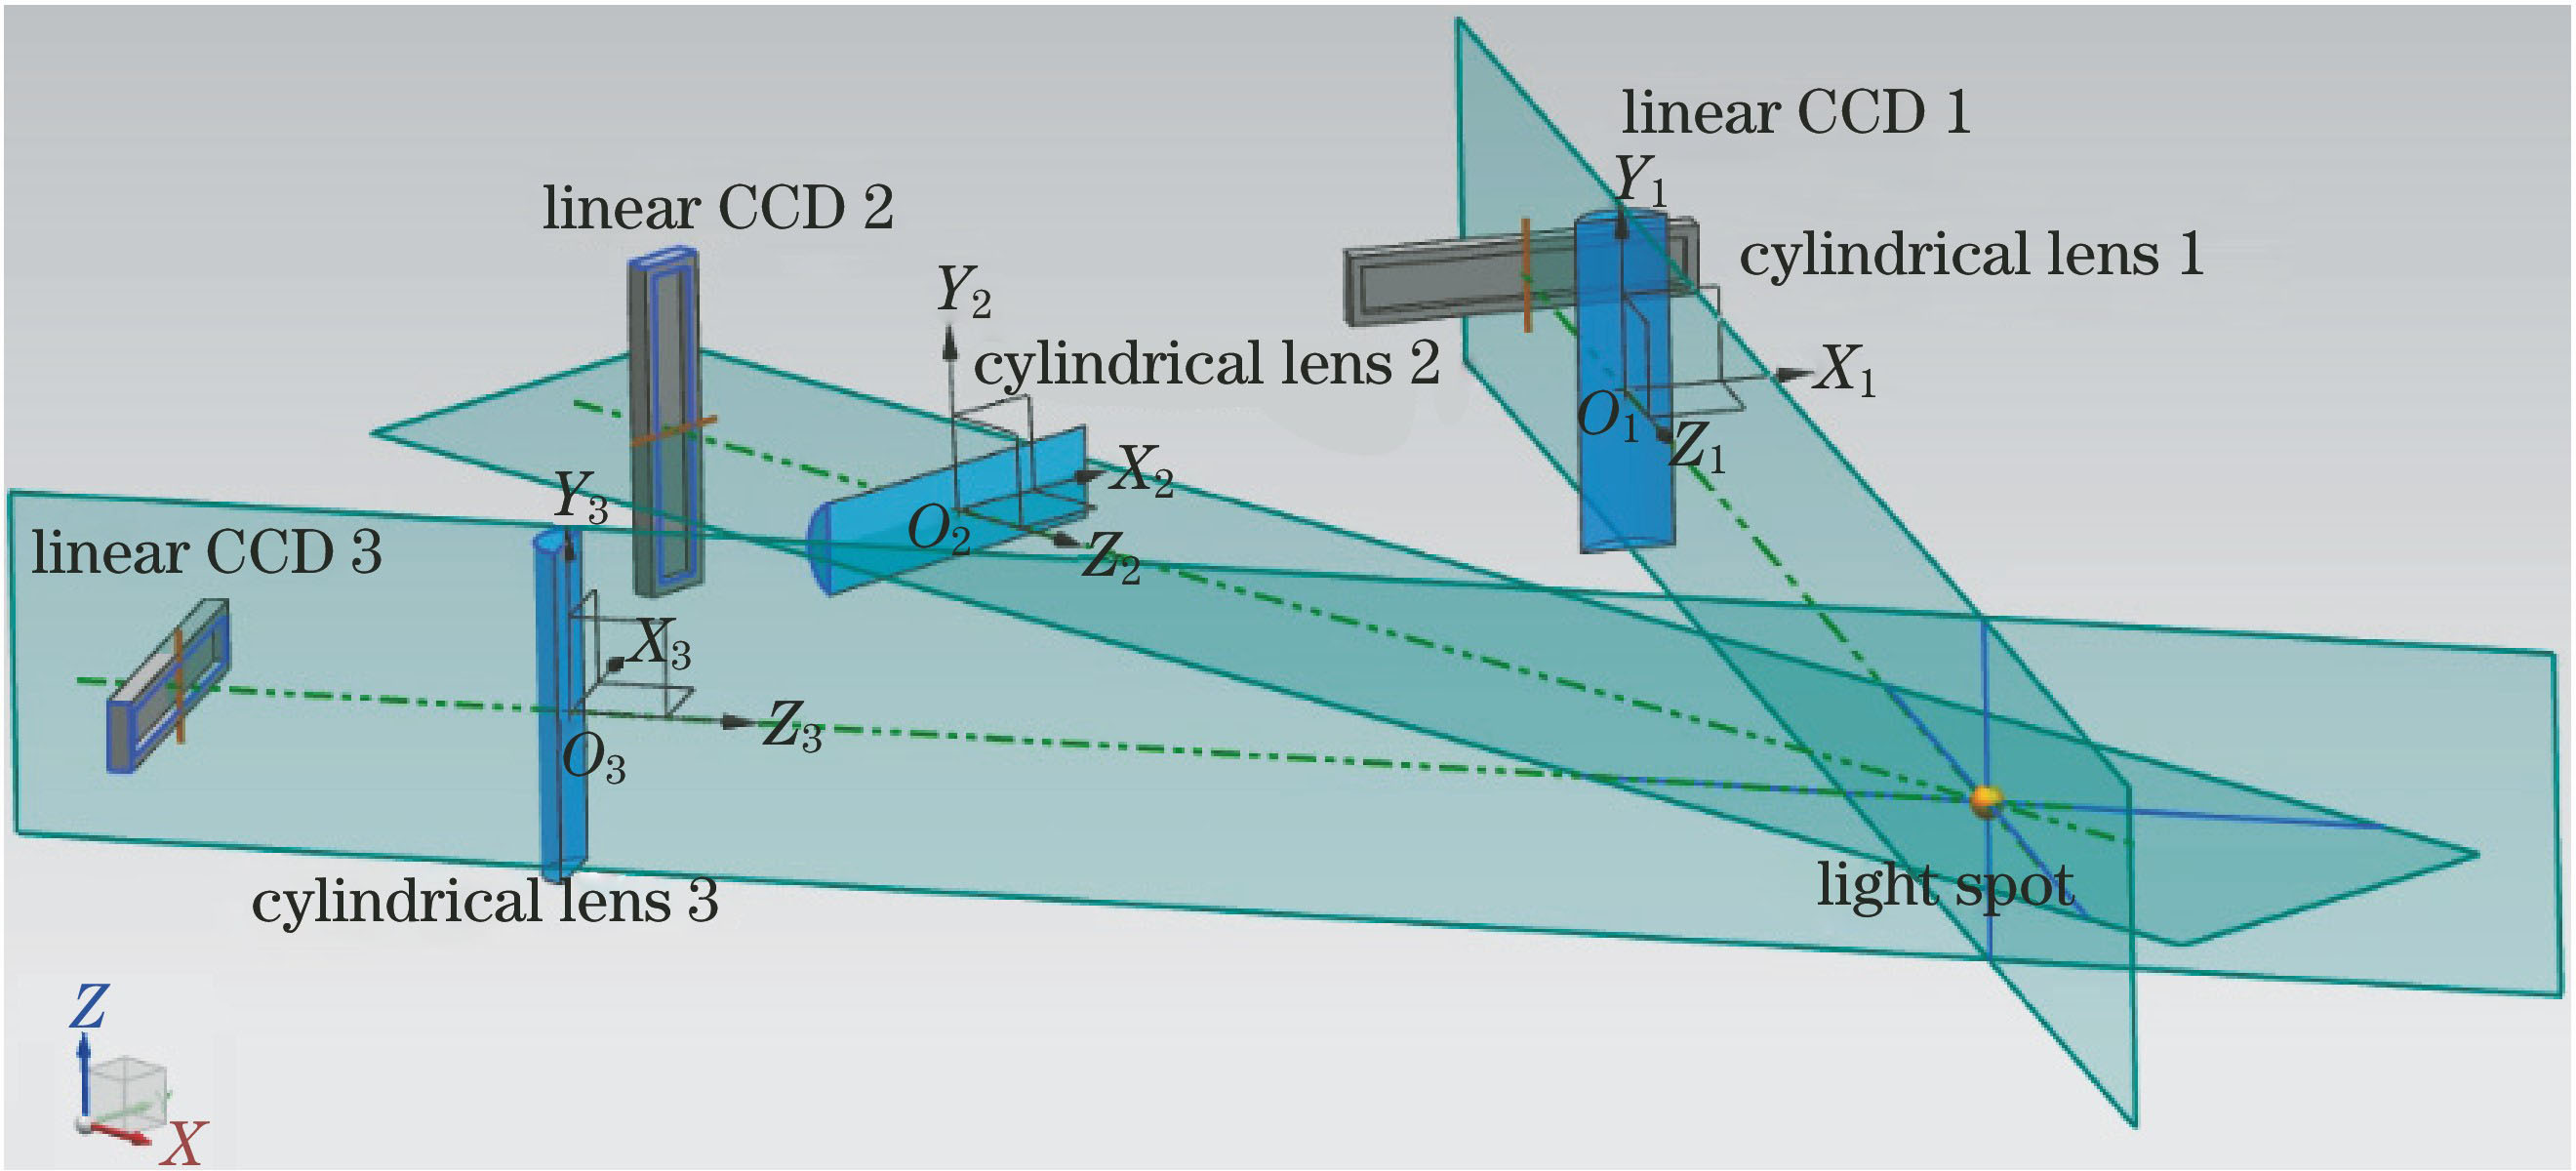 Pose measurement system of linear CCD